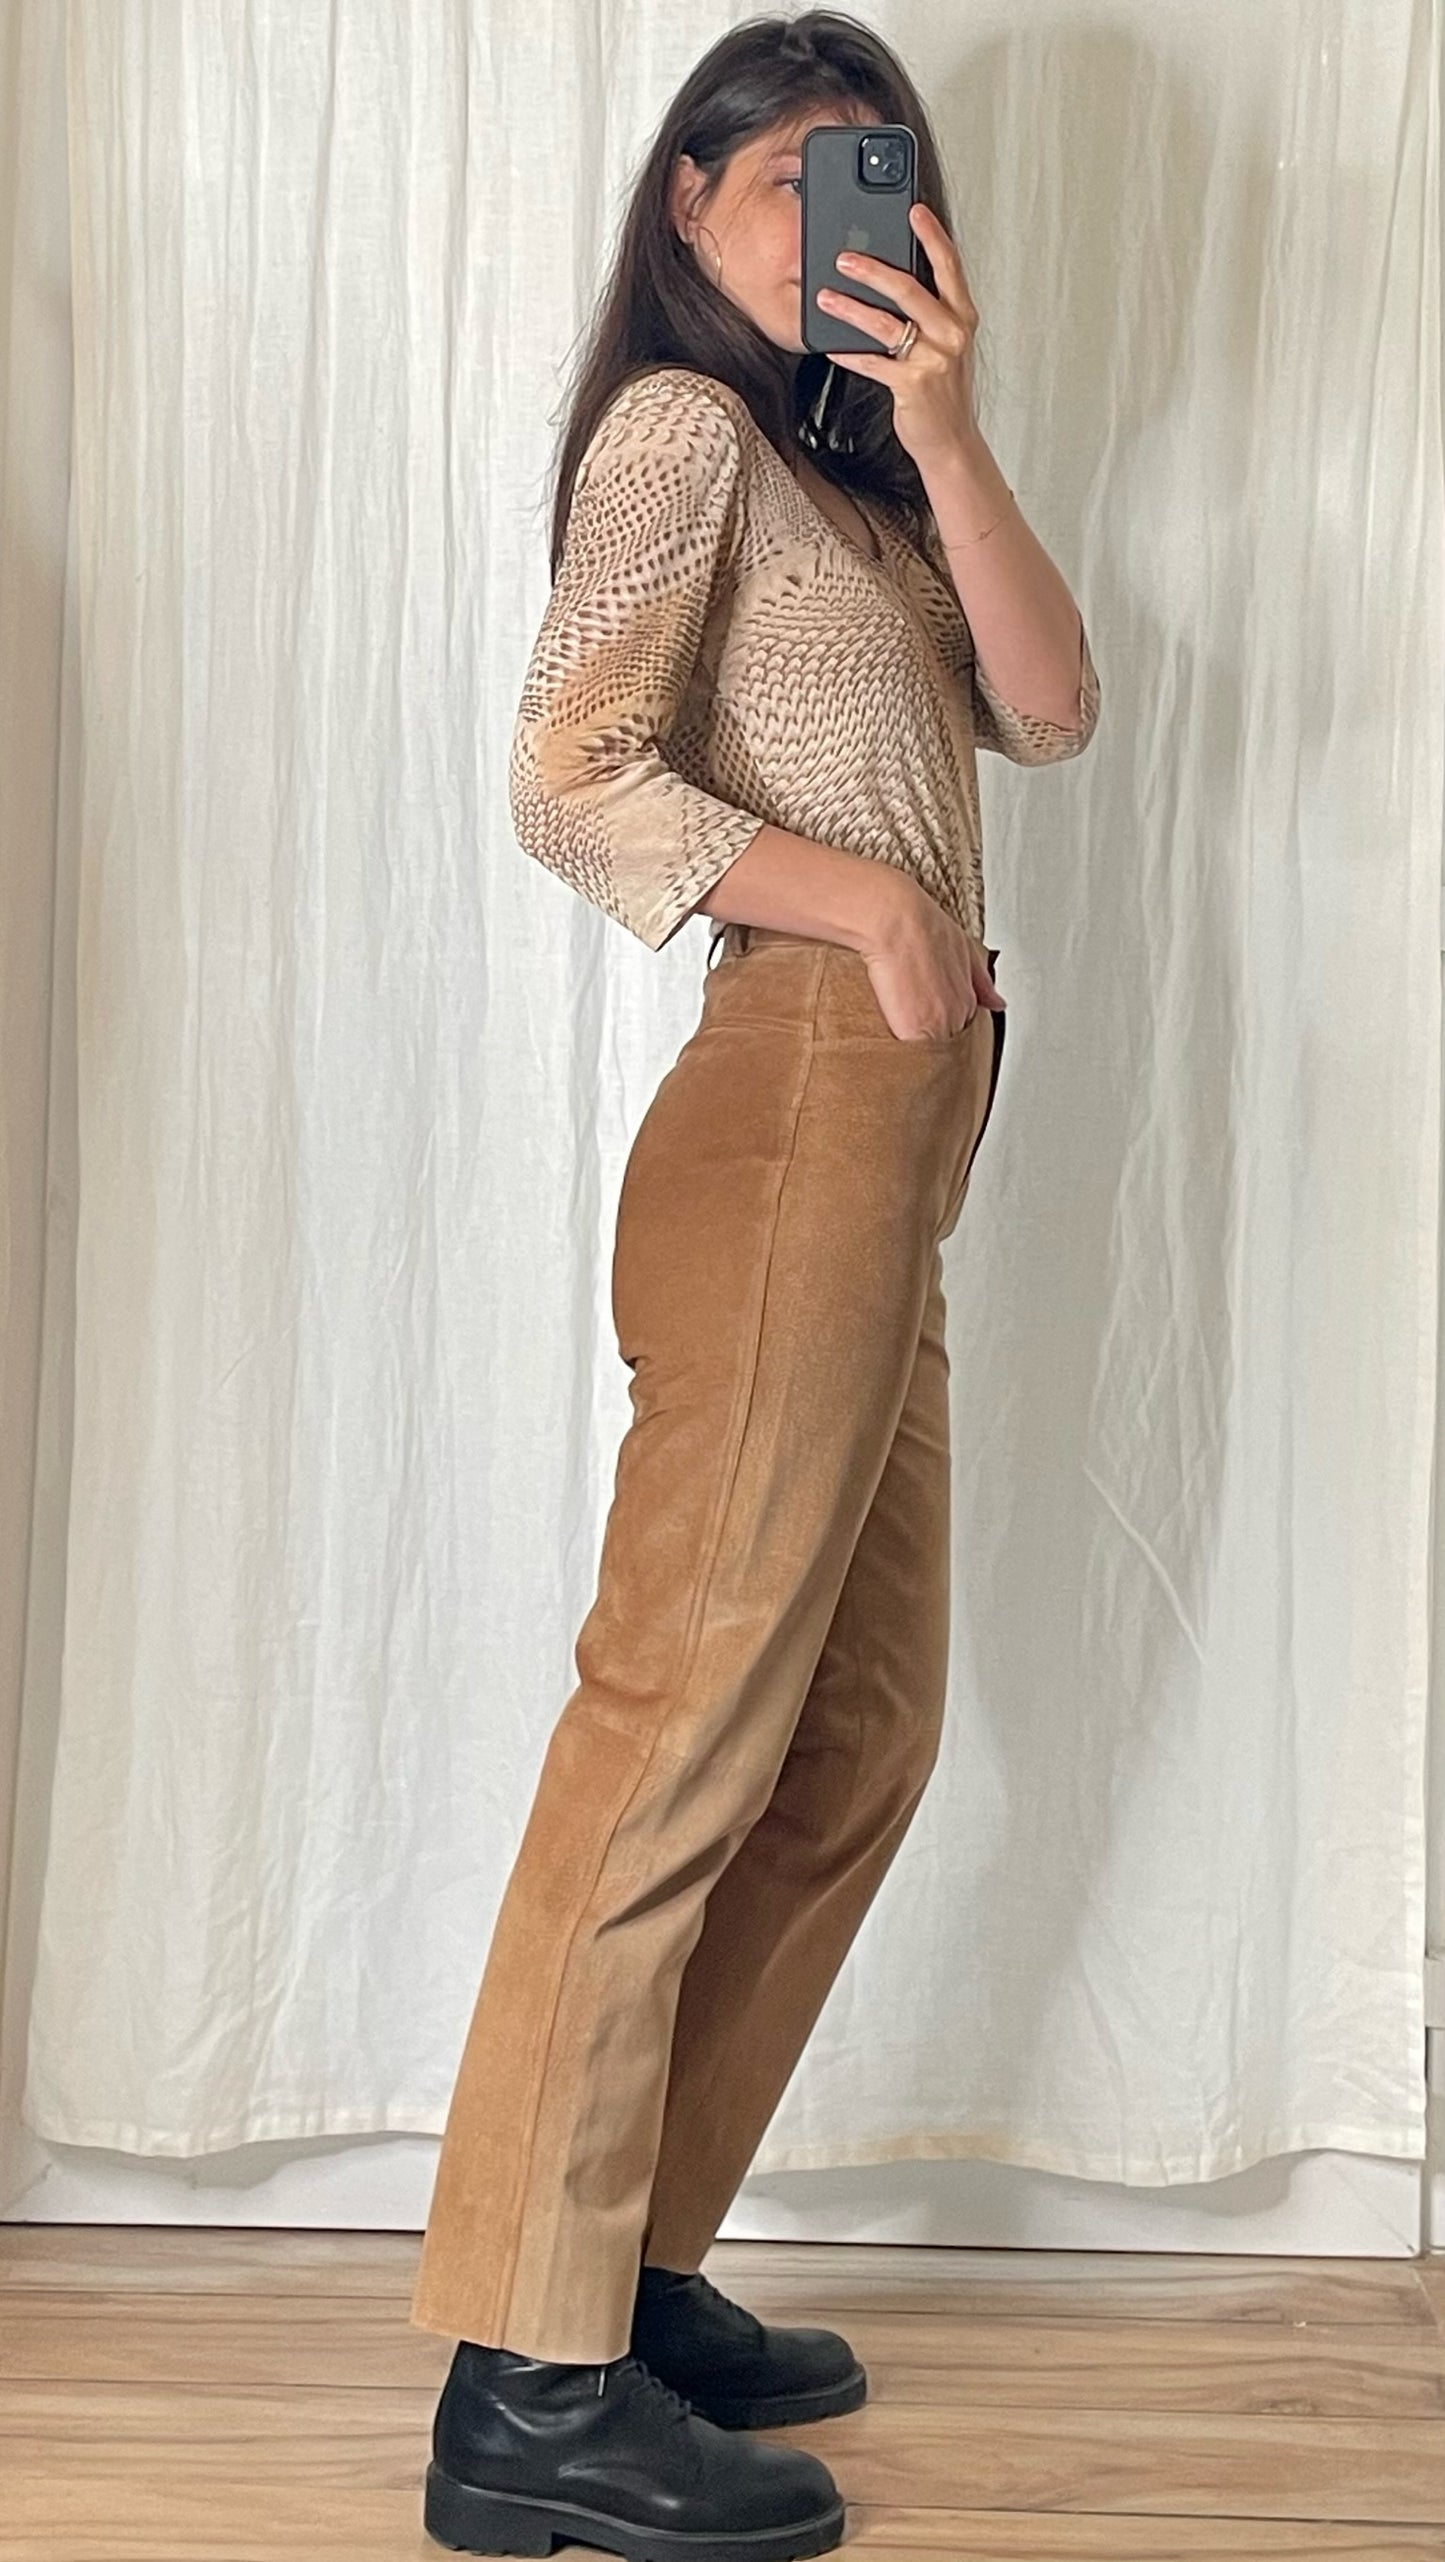 Vintage 100% Leather Brown Pants / 90's High Rise Chocolate Brown Suede  Trousers -  Norway